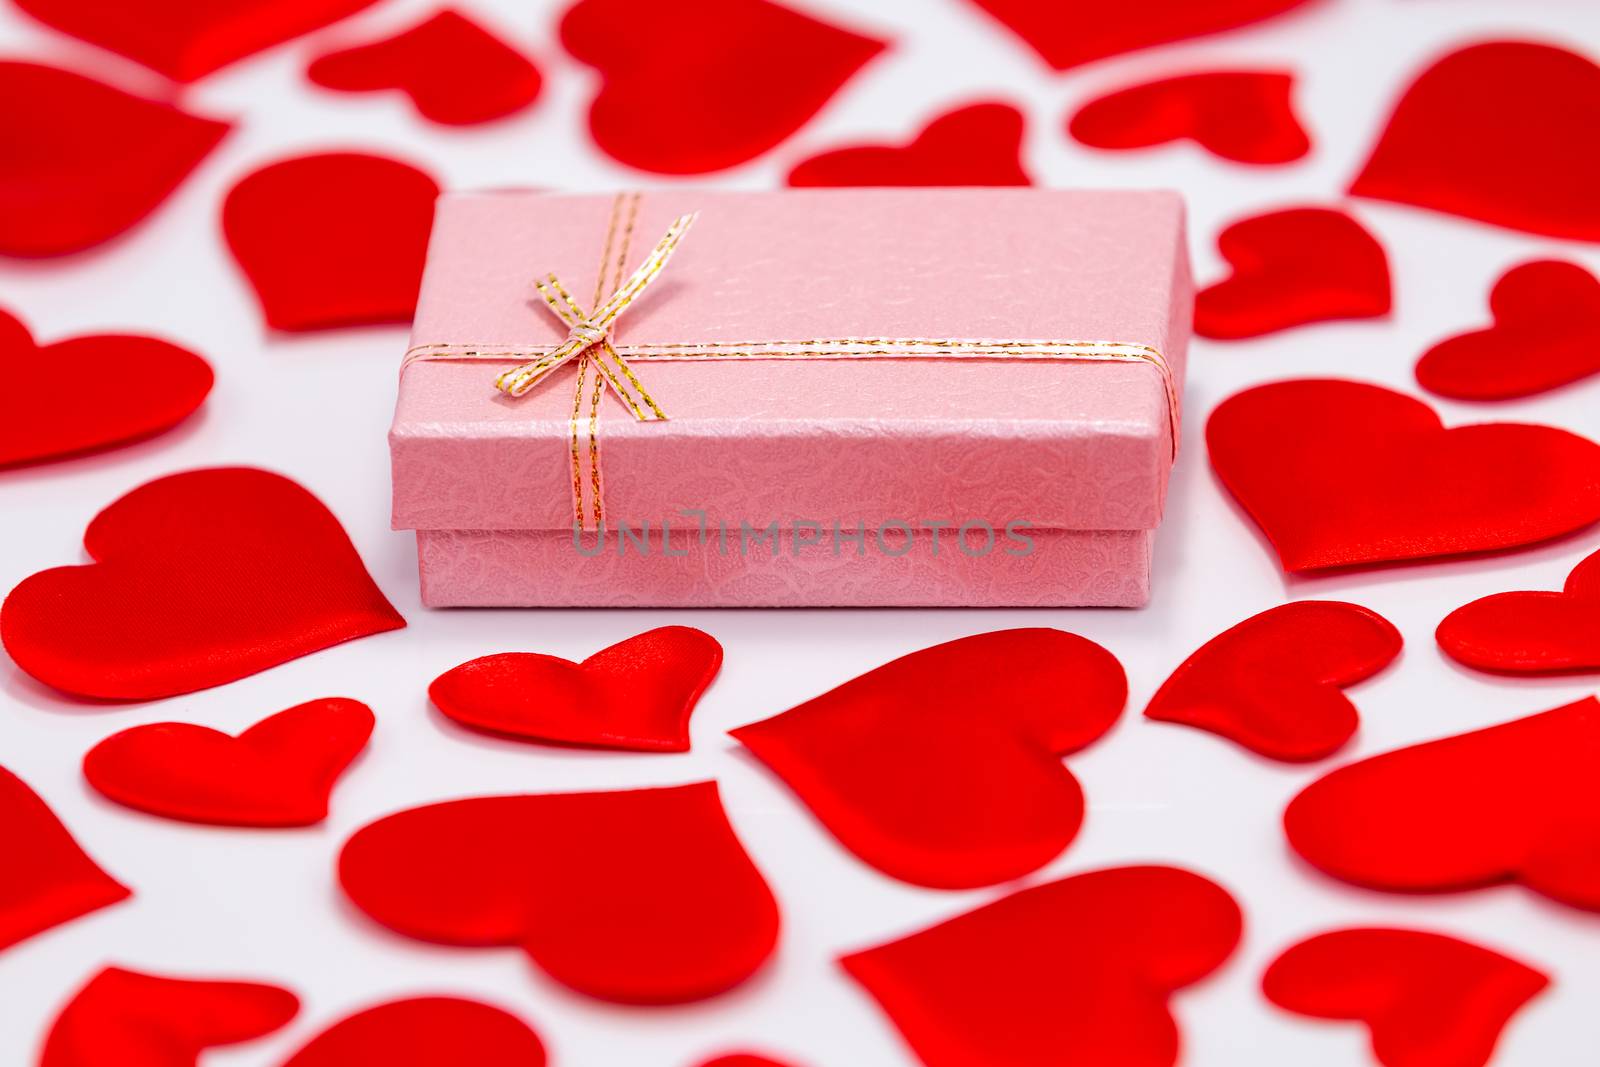 Top View of a Pink Gift Box Surrounded by Scattered Hearts on White Background. St. Valentines Day Concept